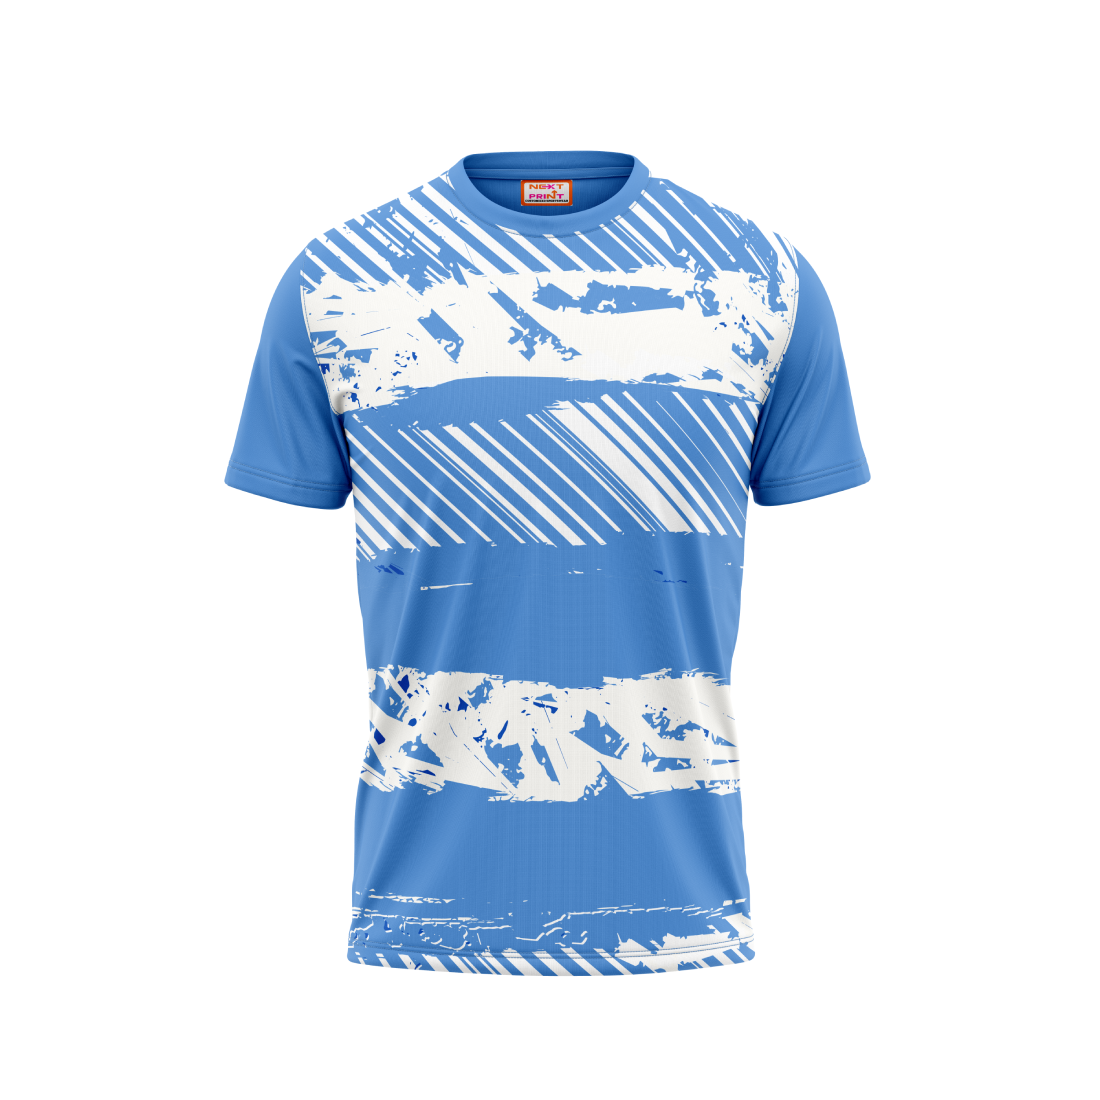 Round Neck Printed Jersey Skyblue NP0052